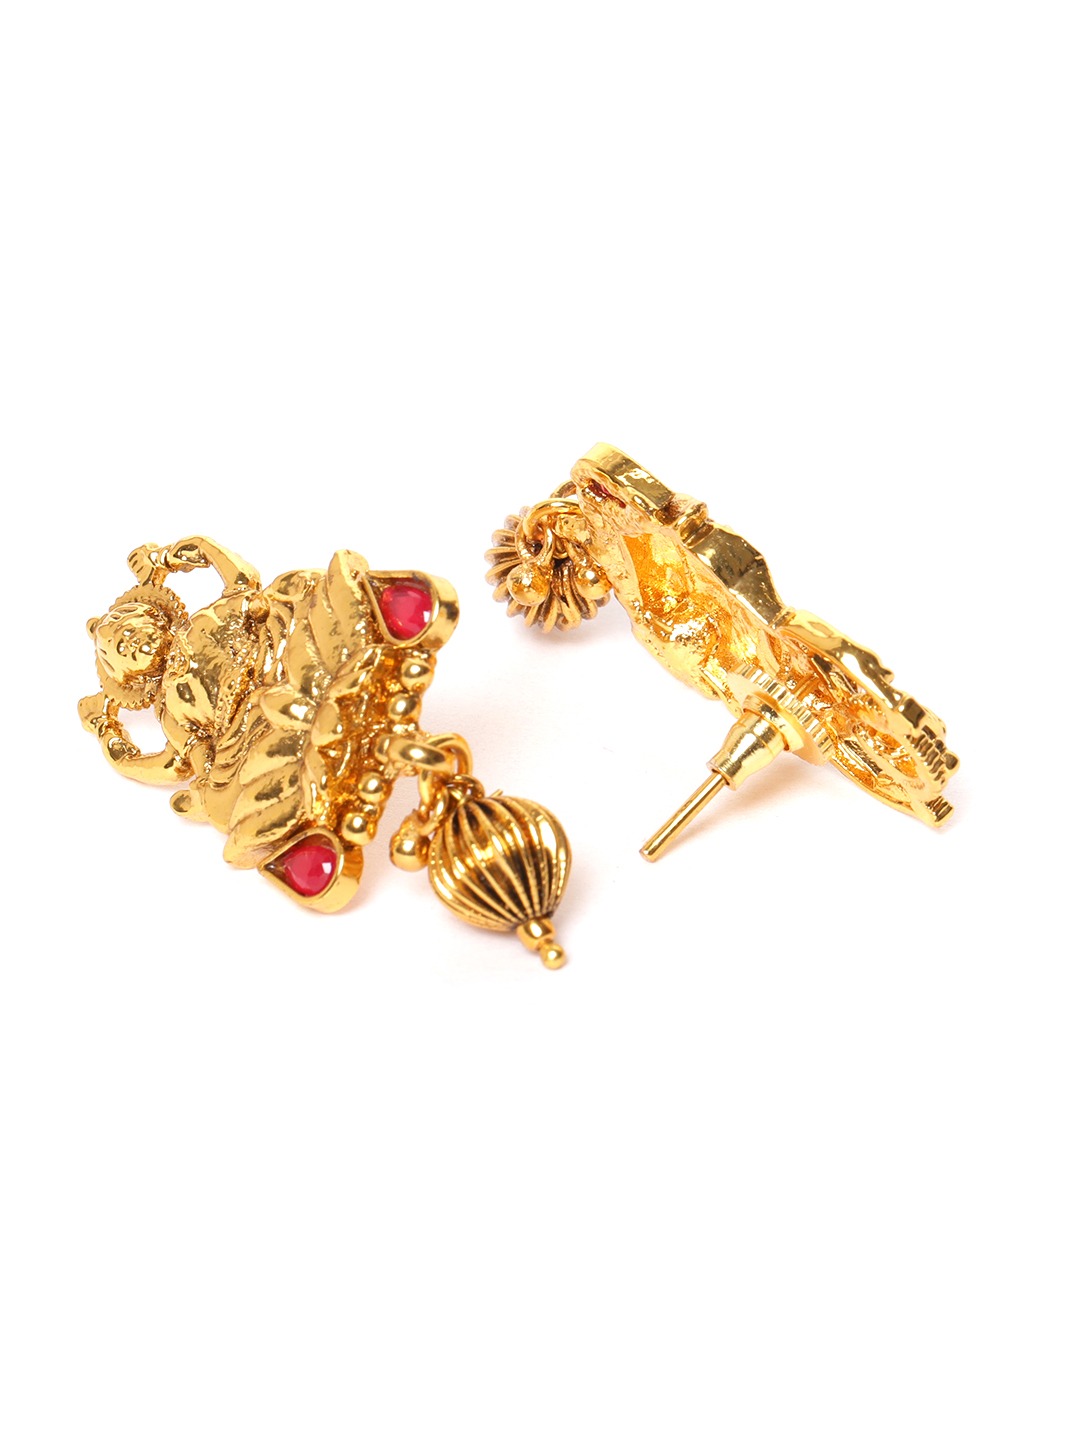 Red Gold-Plated Stone-Studded Goddess Lakshmi Handcrafted Jewellery Set